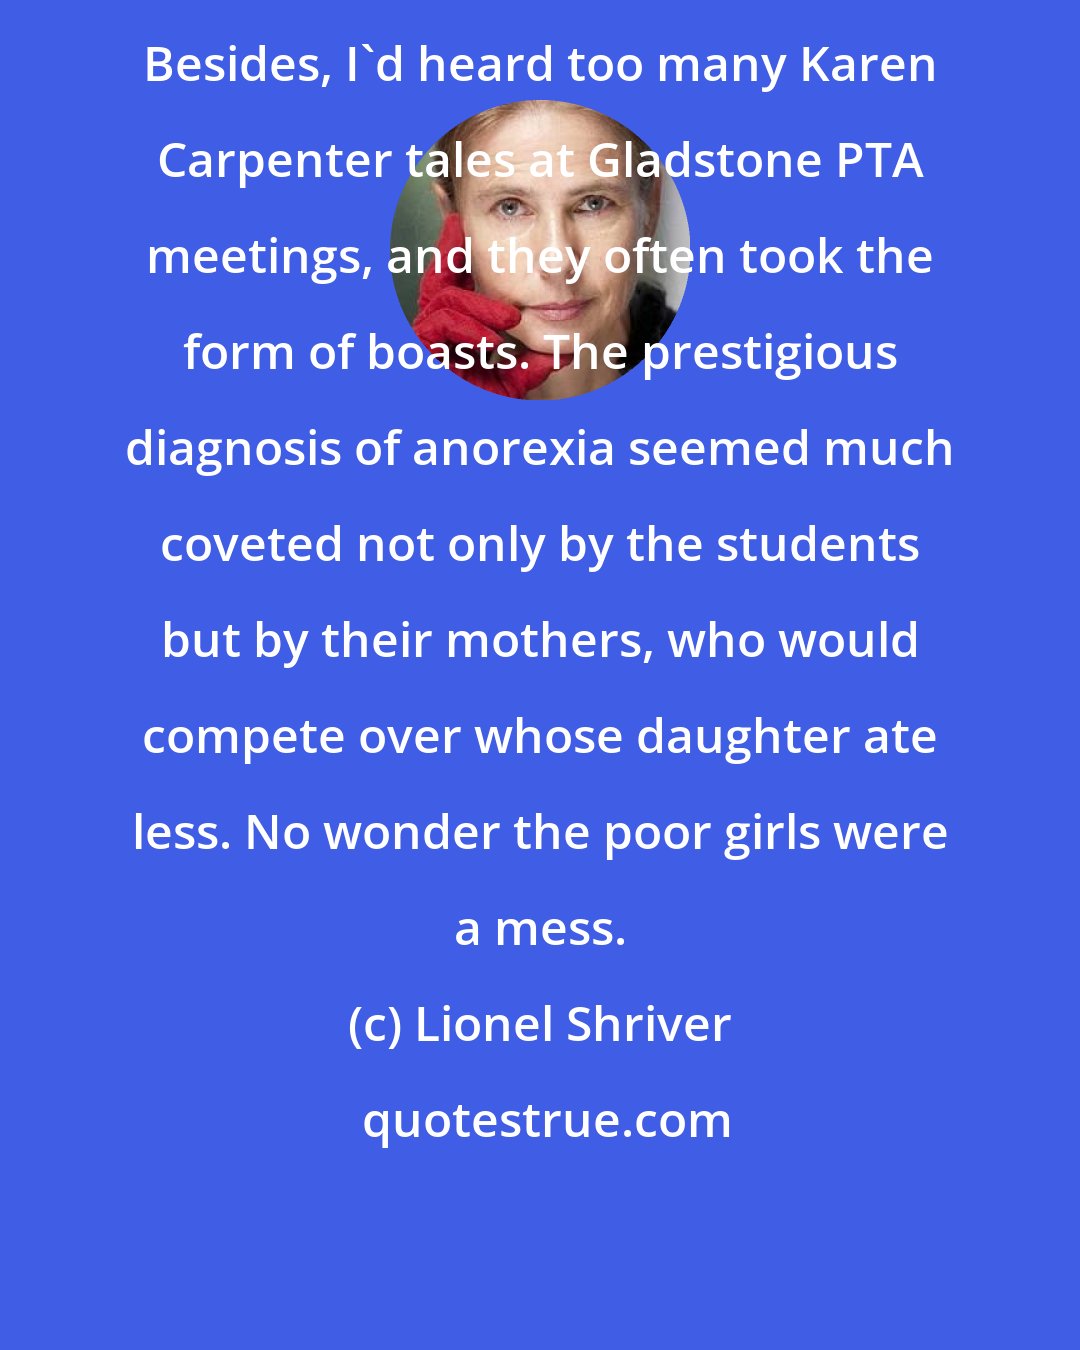 Lionel Shriver: Besides, I'd heard too many Karen Carpenter tales at Gladstone PTA meetings, and they often took the form of boasts. The prestigious diagnosis of anorexia seemed much coveted not only by the students but by their mothers, who would compete over whose daughter ate less. No wonder the poor girls were a mess.